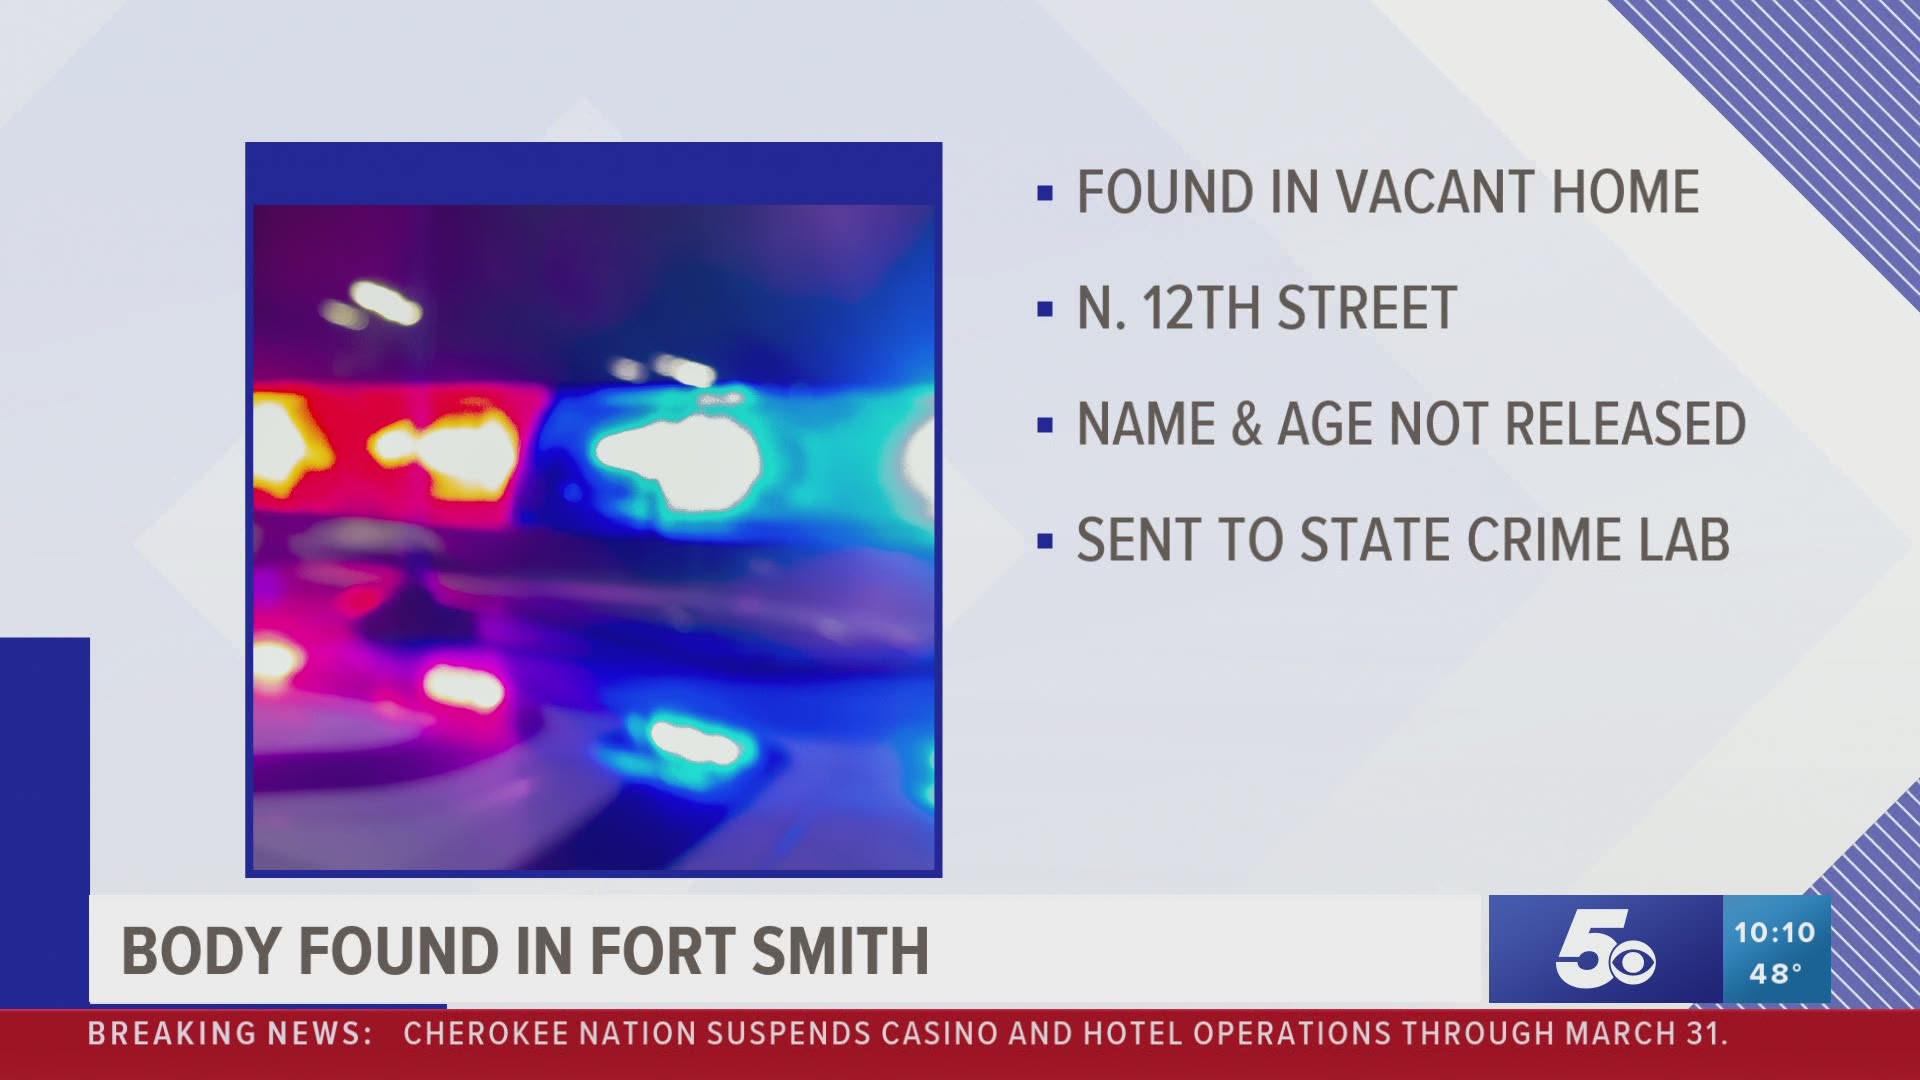 Body found in Fort Smith